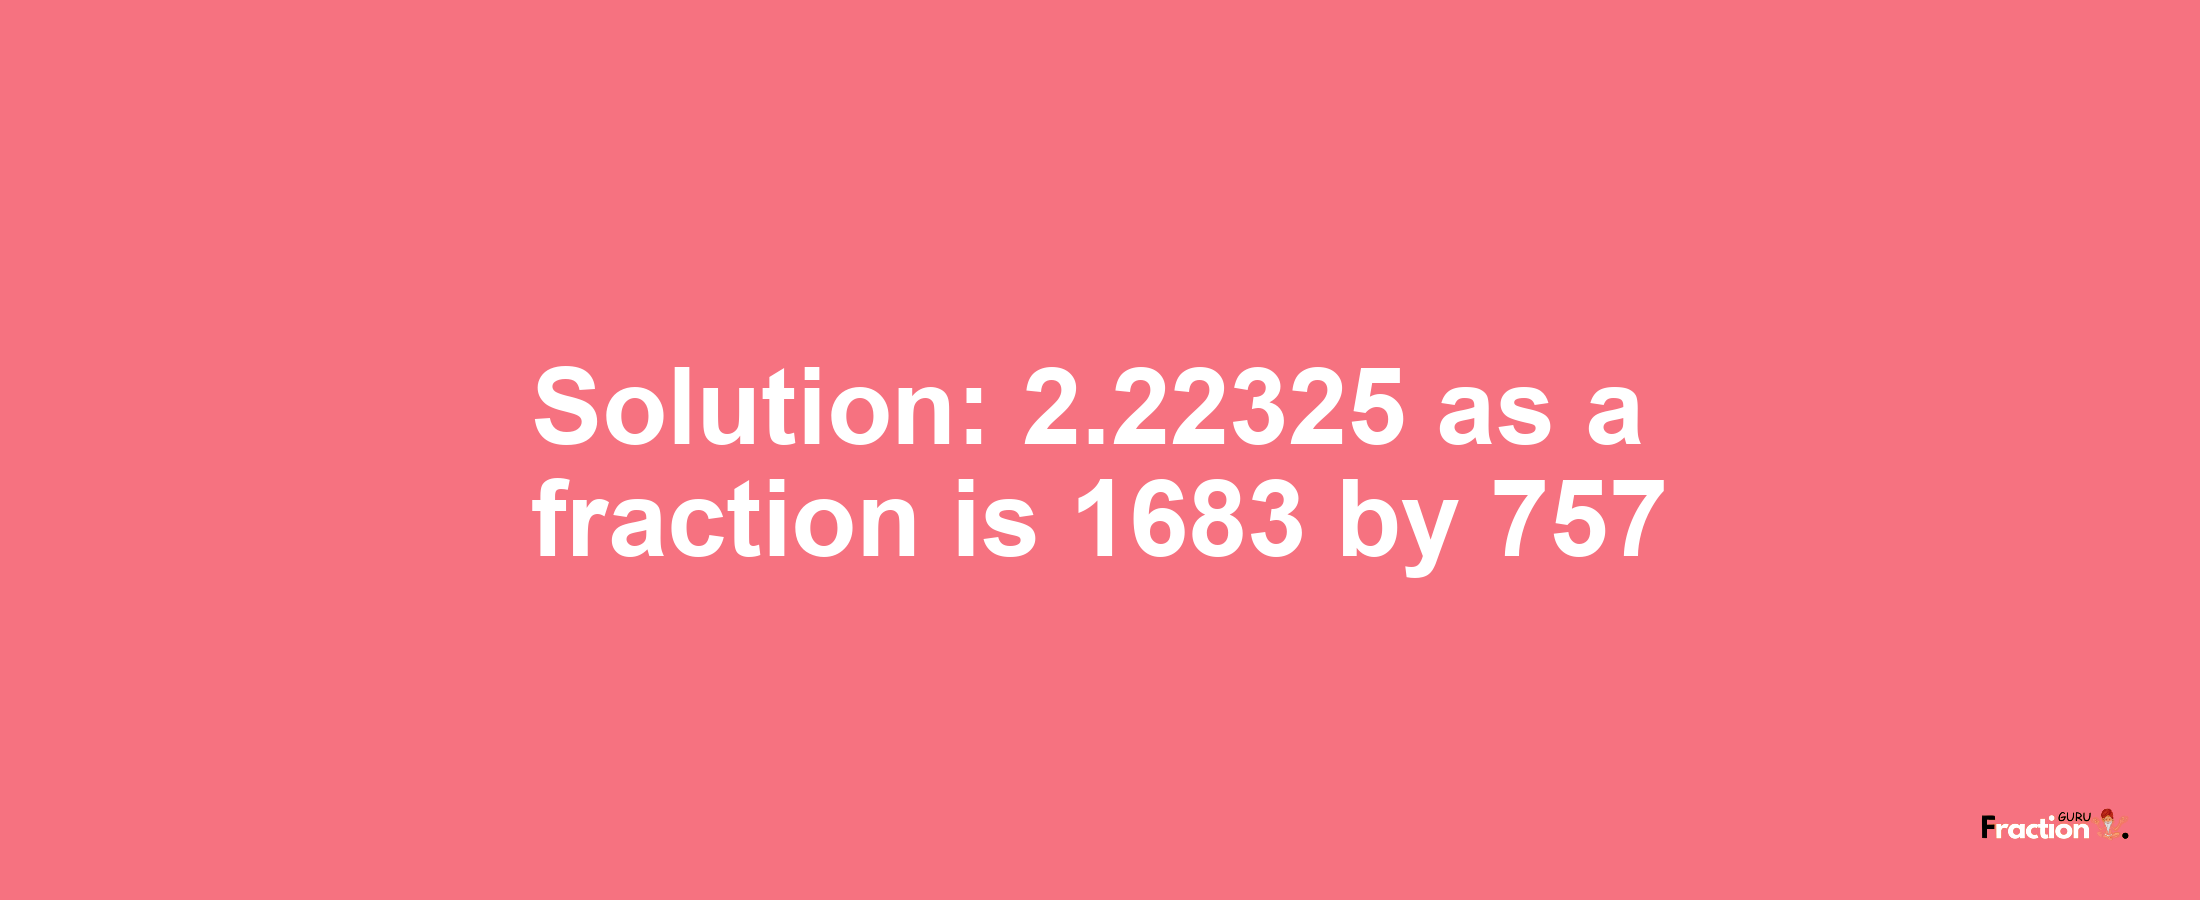 Solution:2.22325 as a fraction is 1683/757